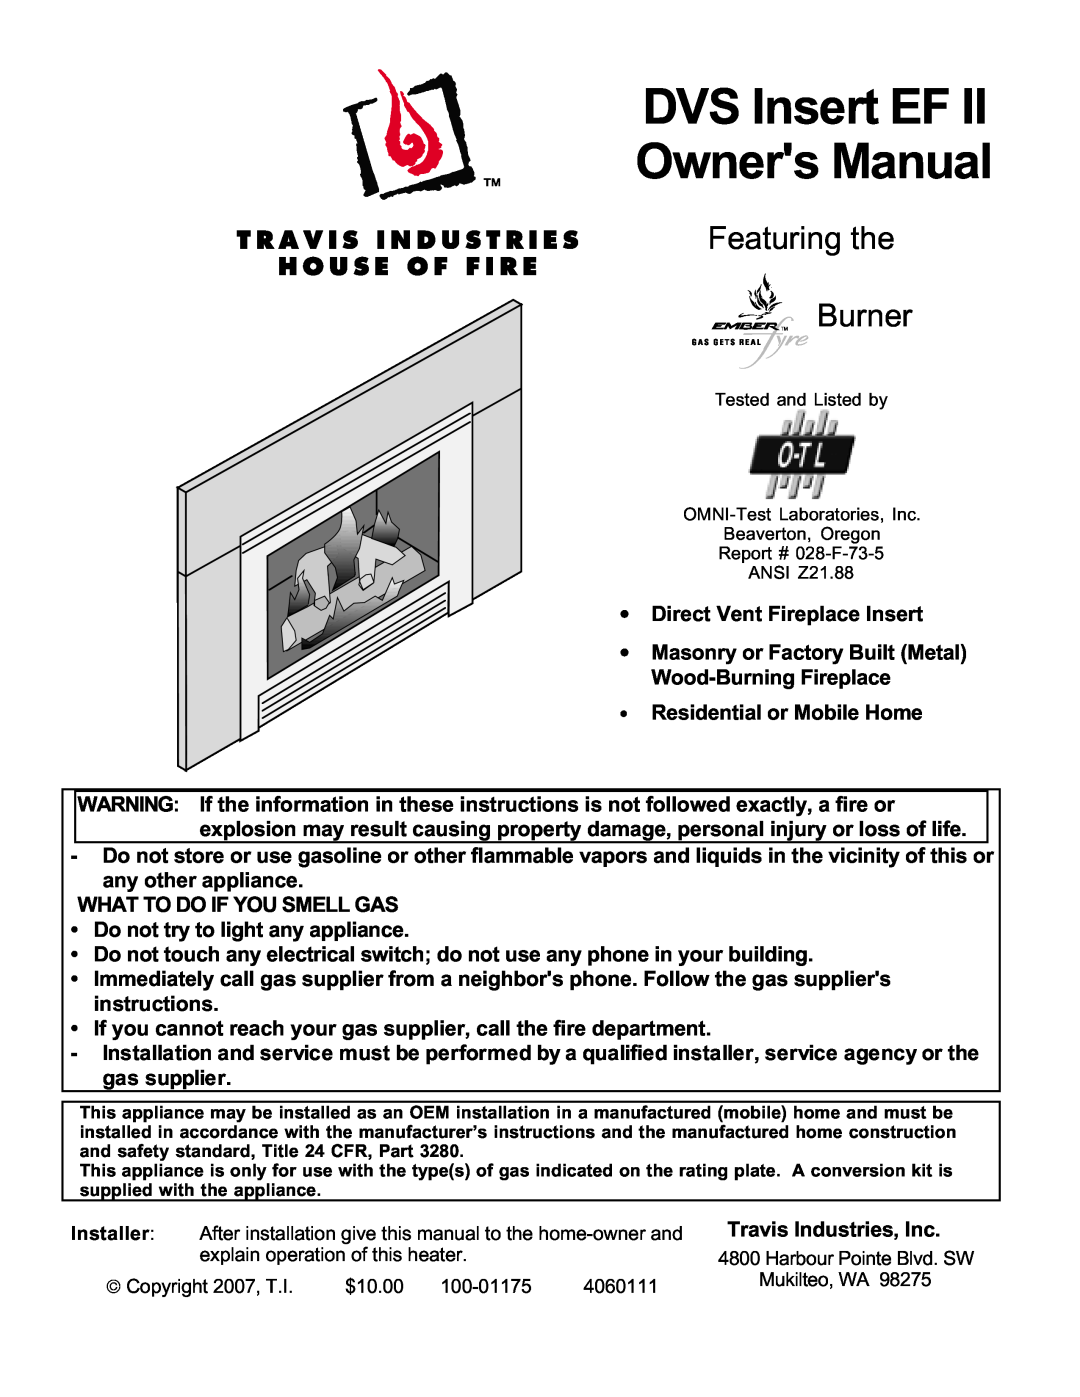 Avalon Stoves DVS Insert EF II owner manual Featuring the Burner 